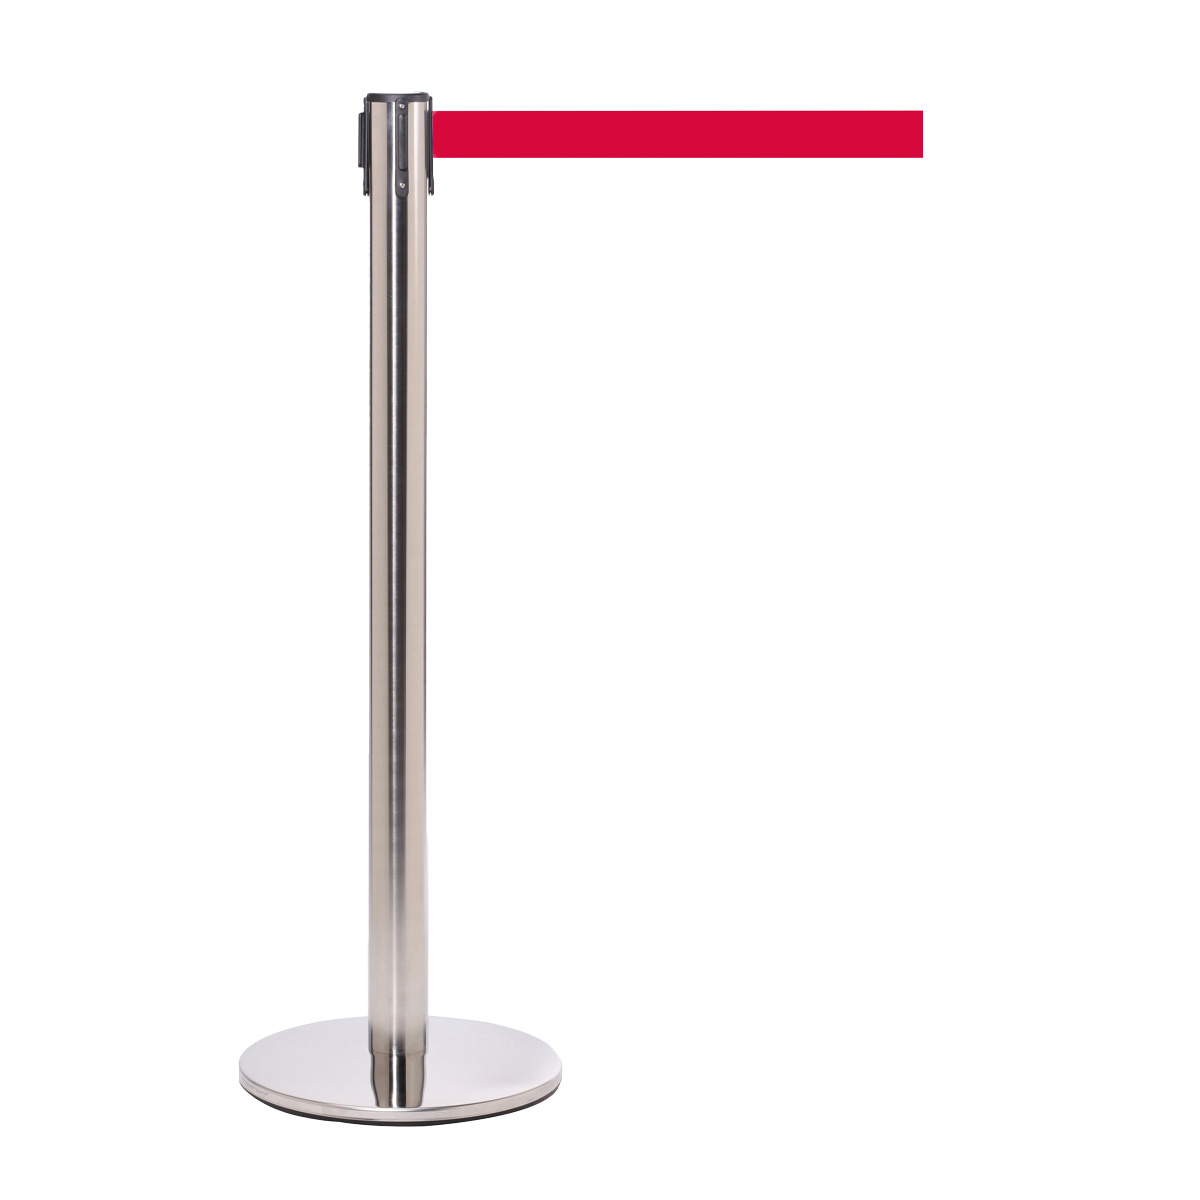 QueuePro Retractable Queue Barriers Can be Used To Build Modular Queue Systems For Large Scale Queues